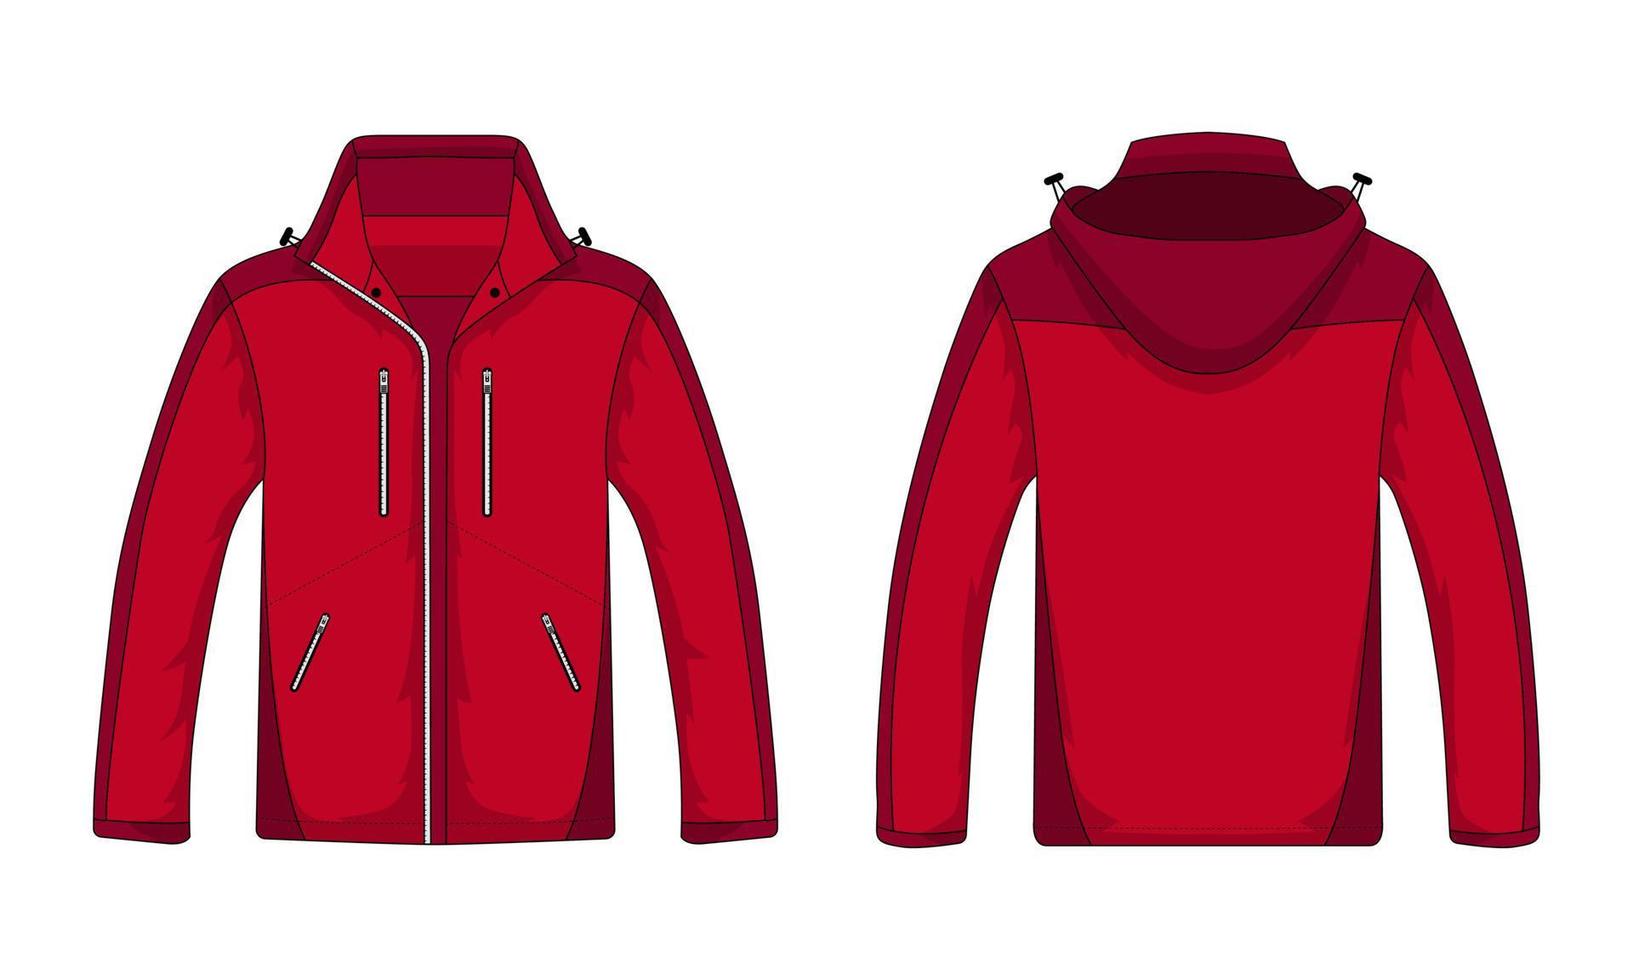 Long sleeve red parachute jacket template front and back view vector